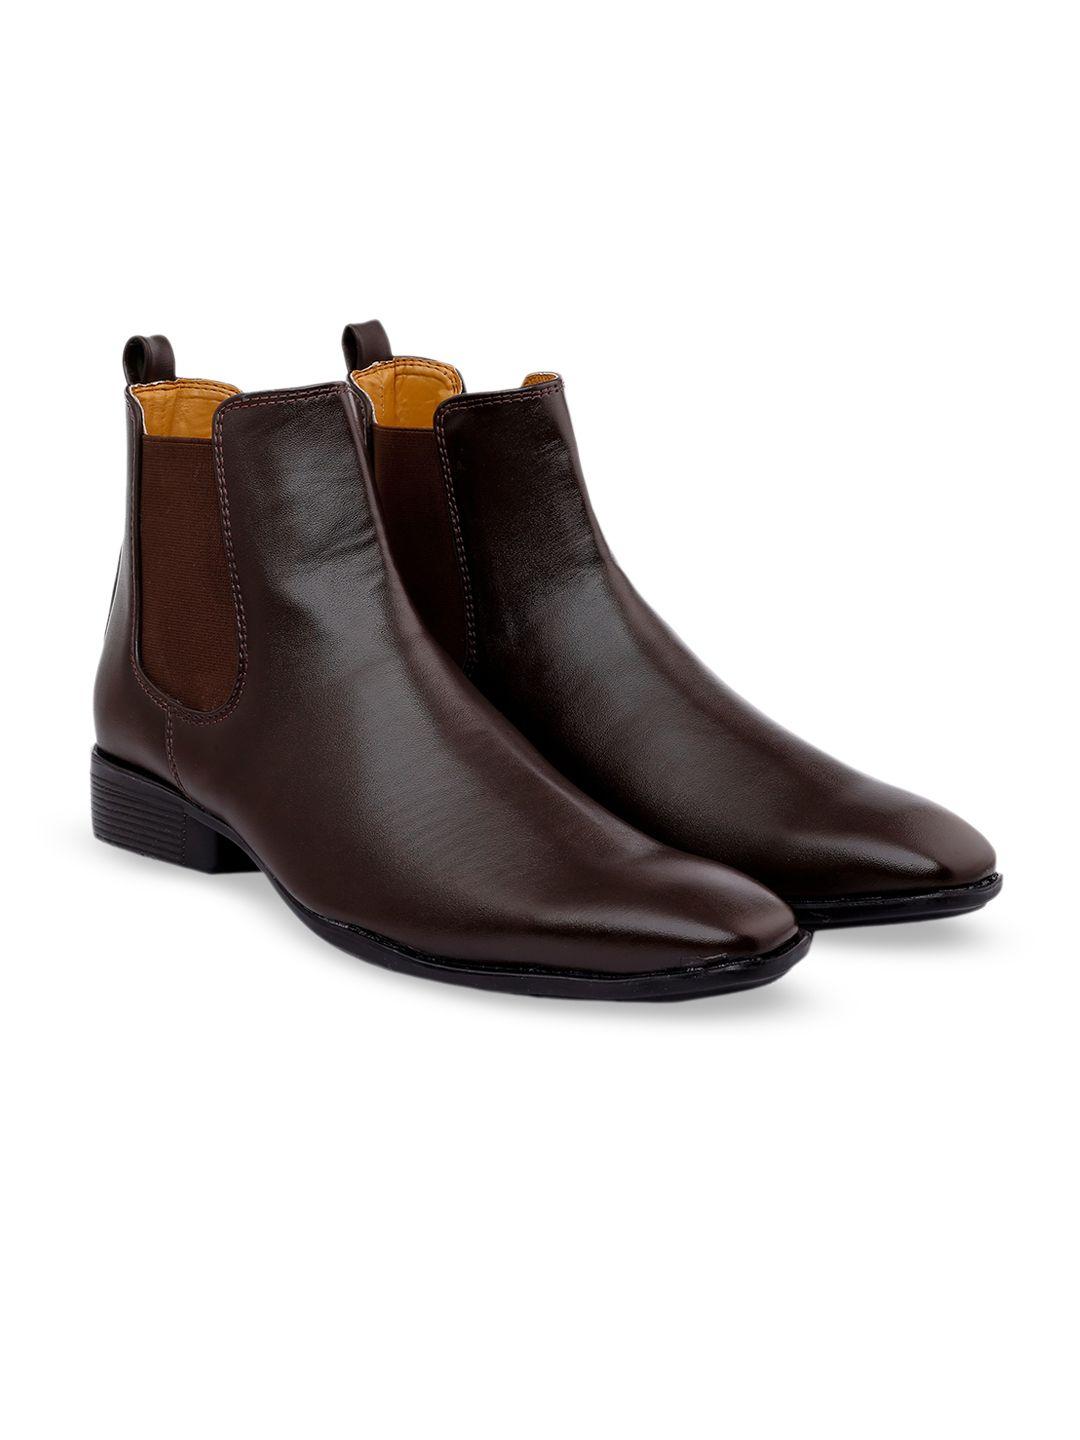 the roadster lifestyle co. men brown square toe mid top chelsea boots